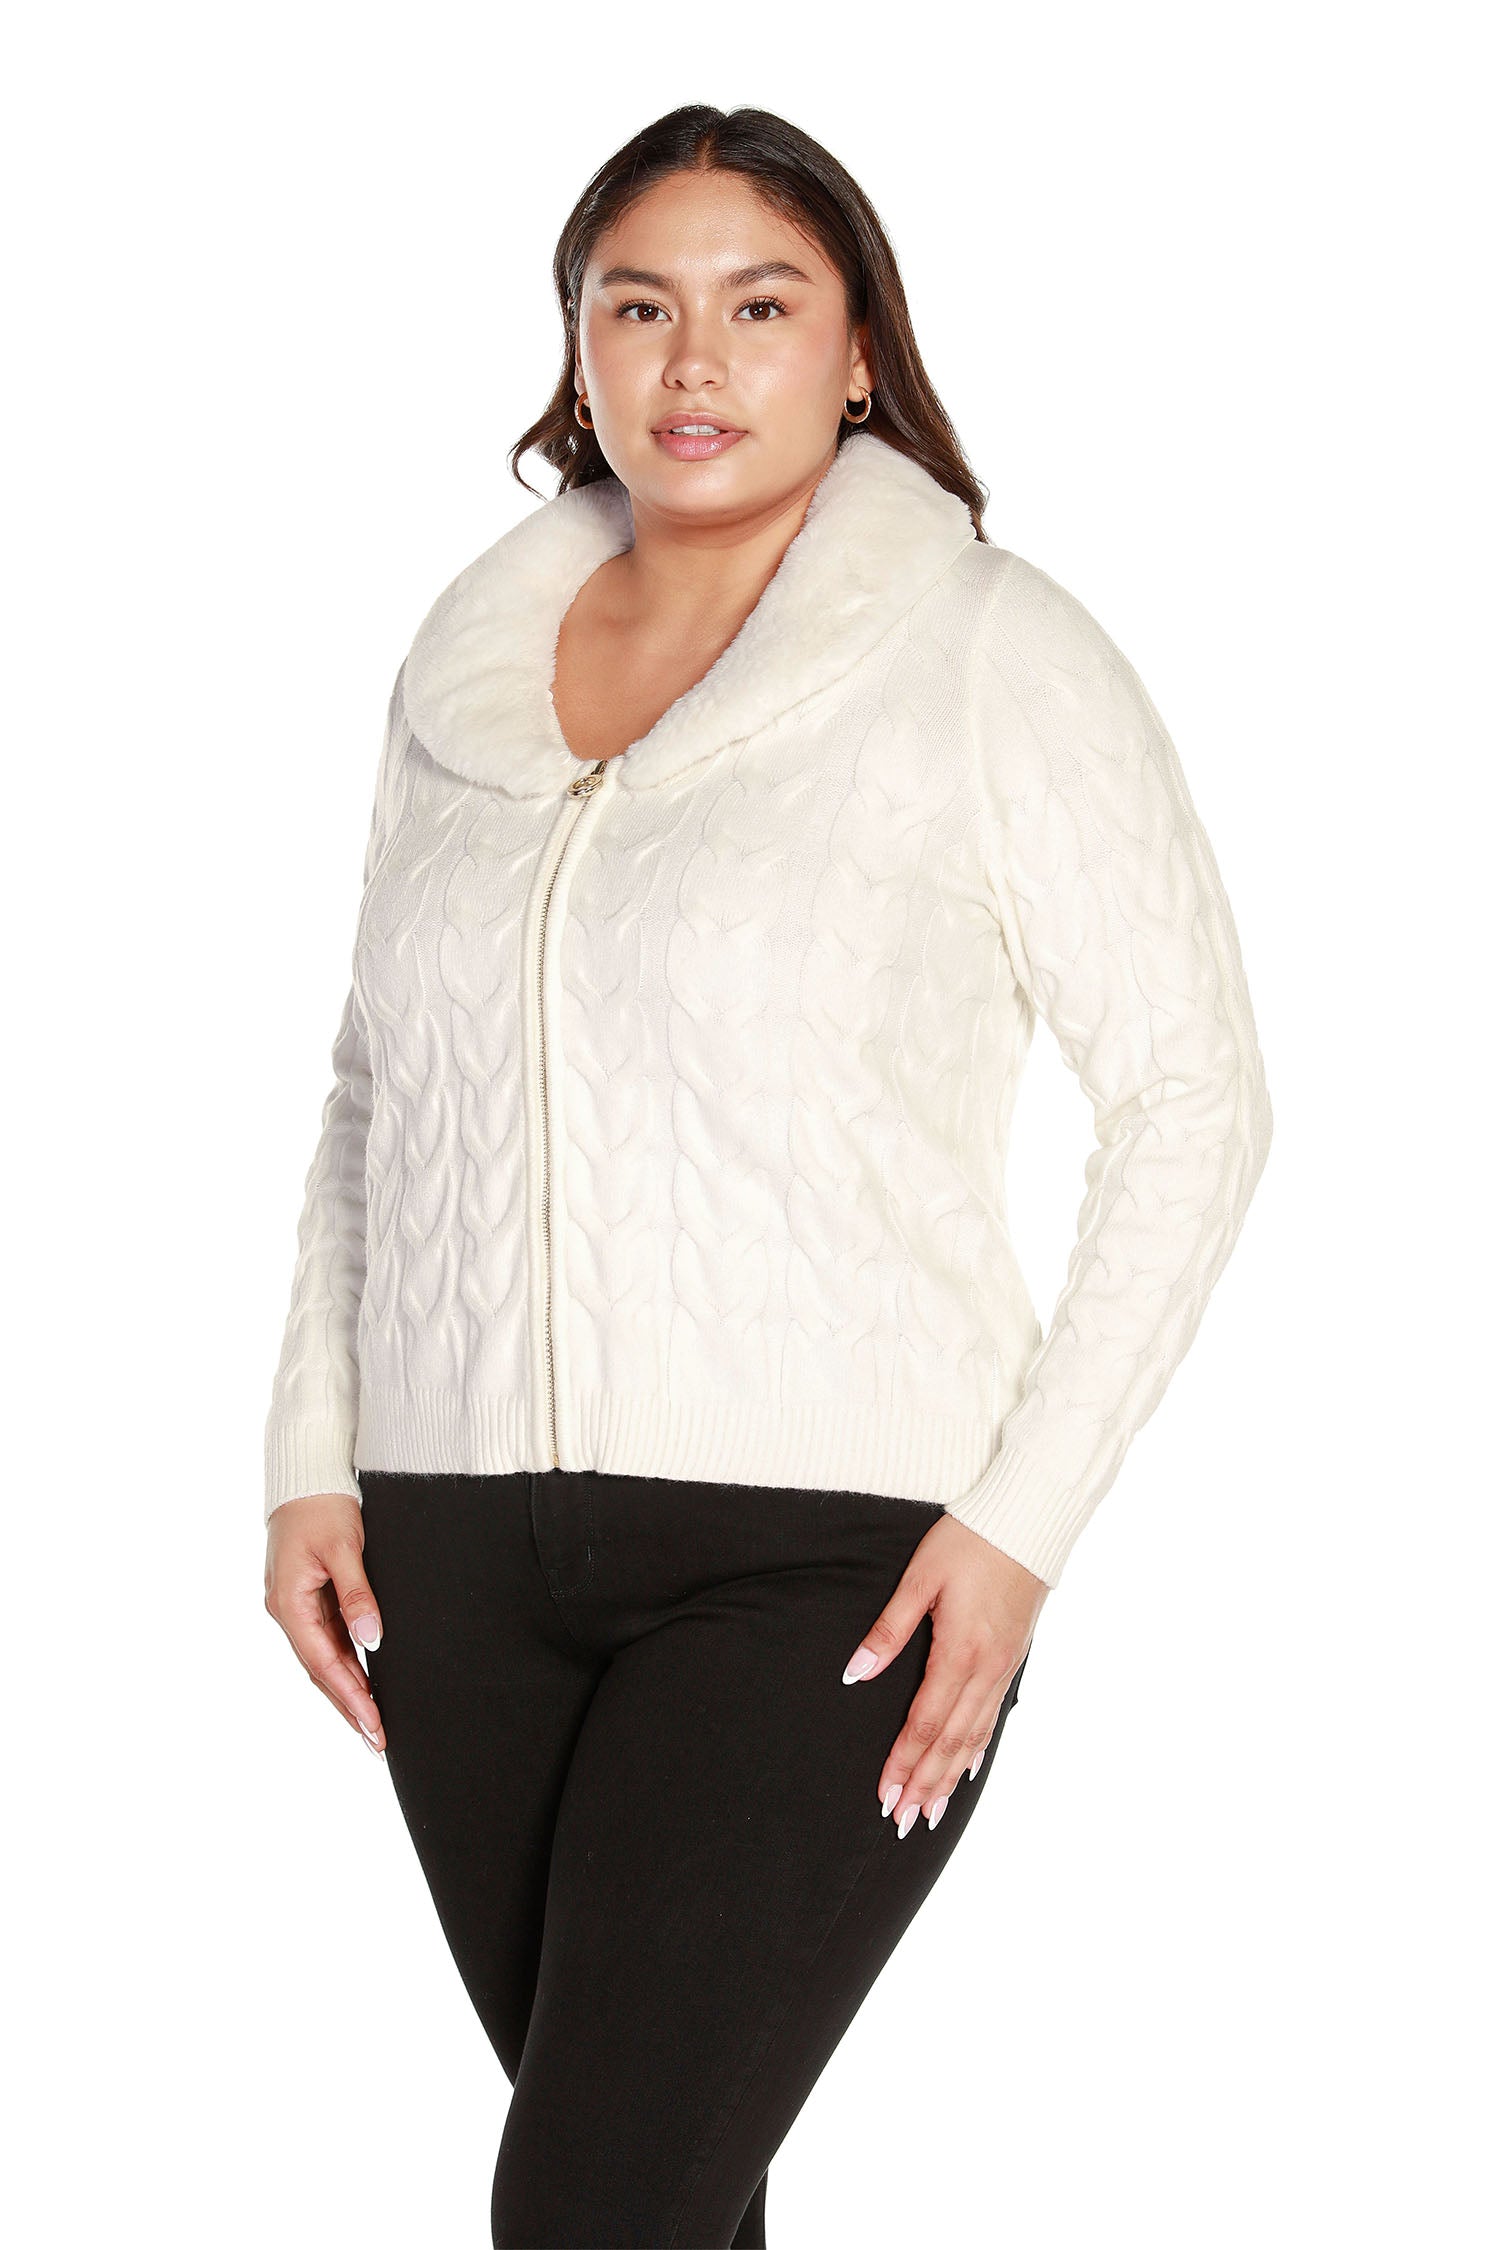 Women's Zip Front Cable Knit Cardigan Sweater with Faux Fur Collar | Curvy